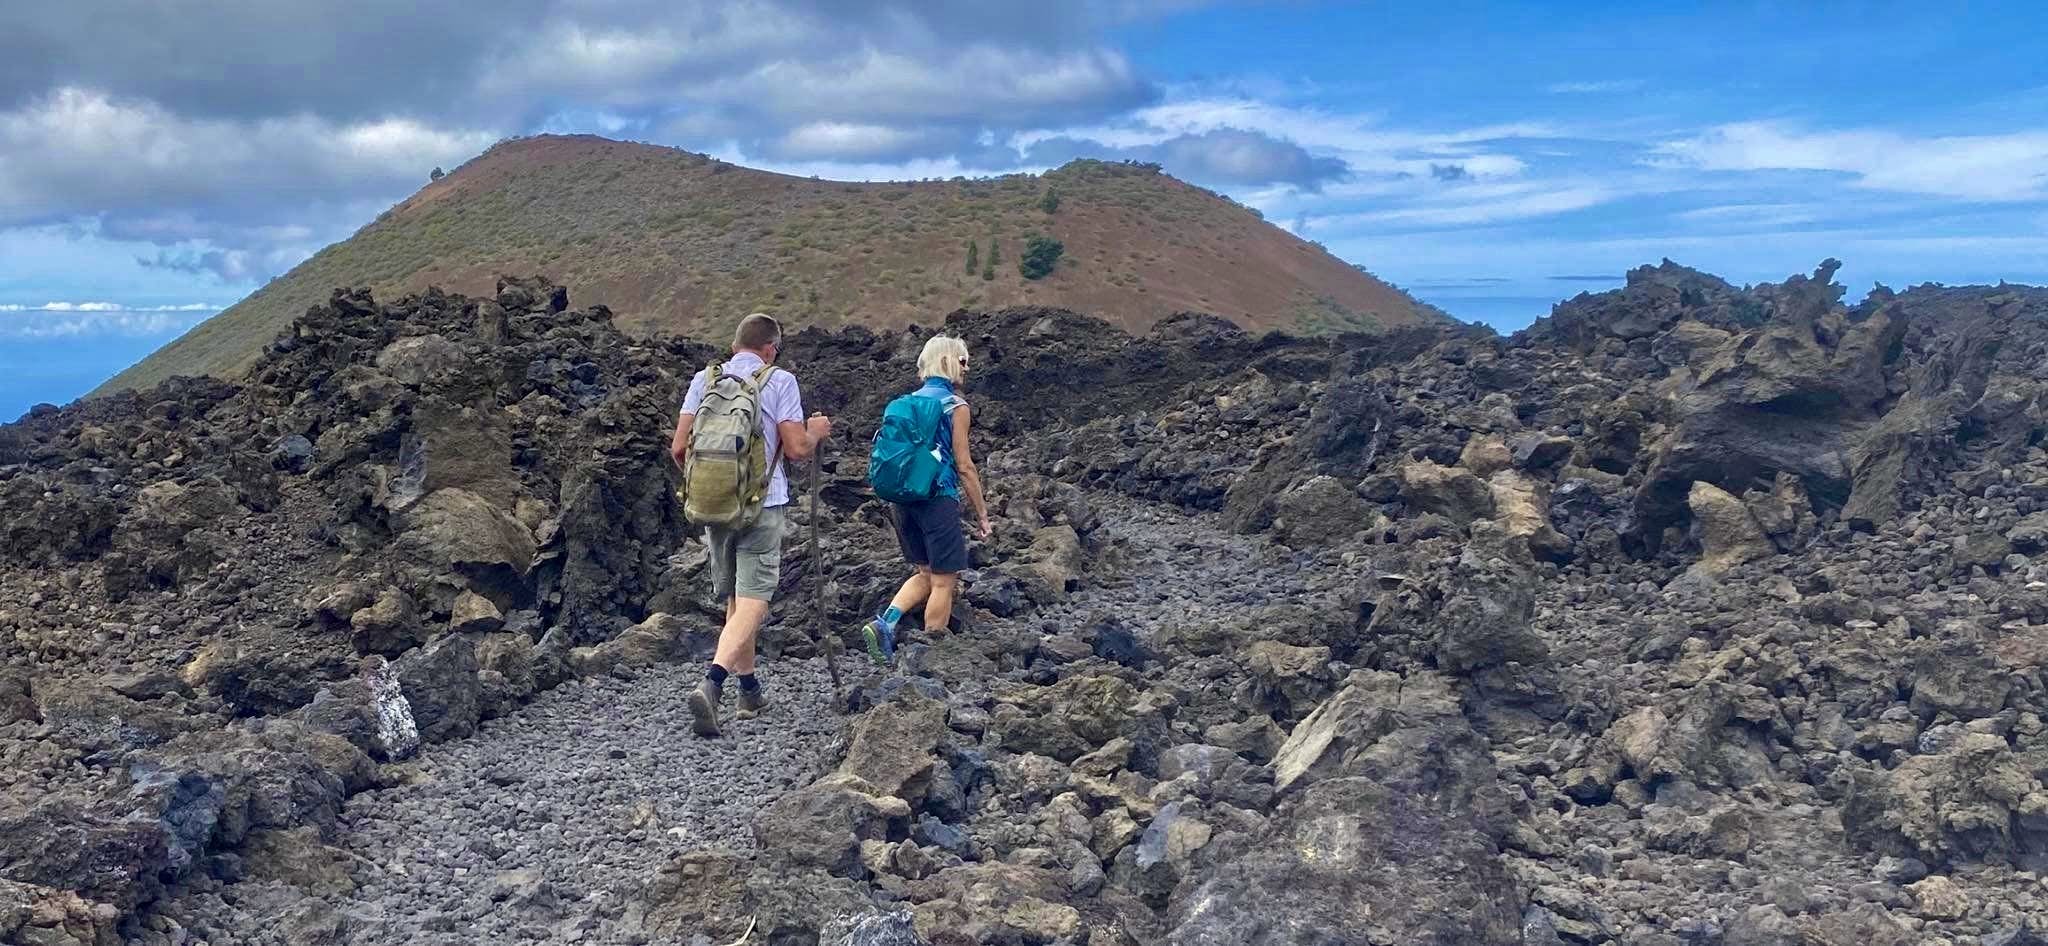 Hiking trail in front of Montaña Bilma over the lava flow of Chinyero